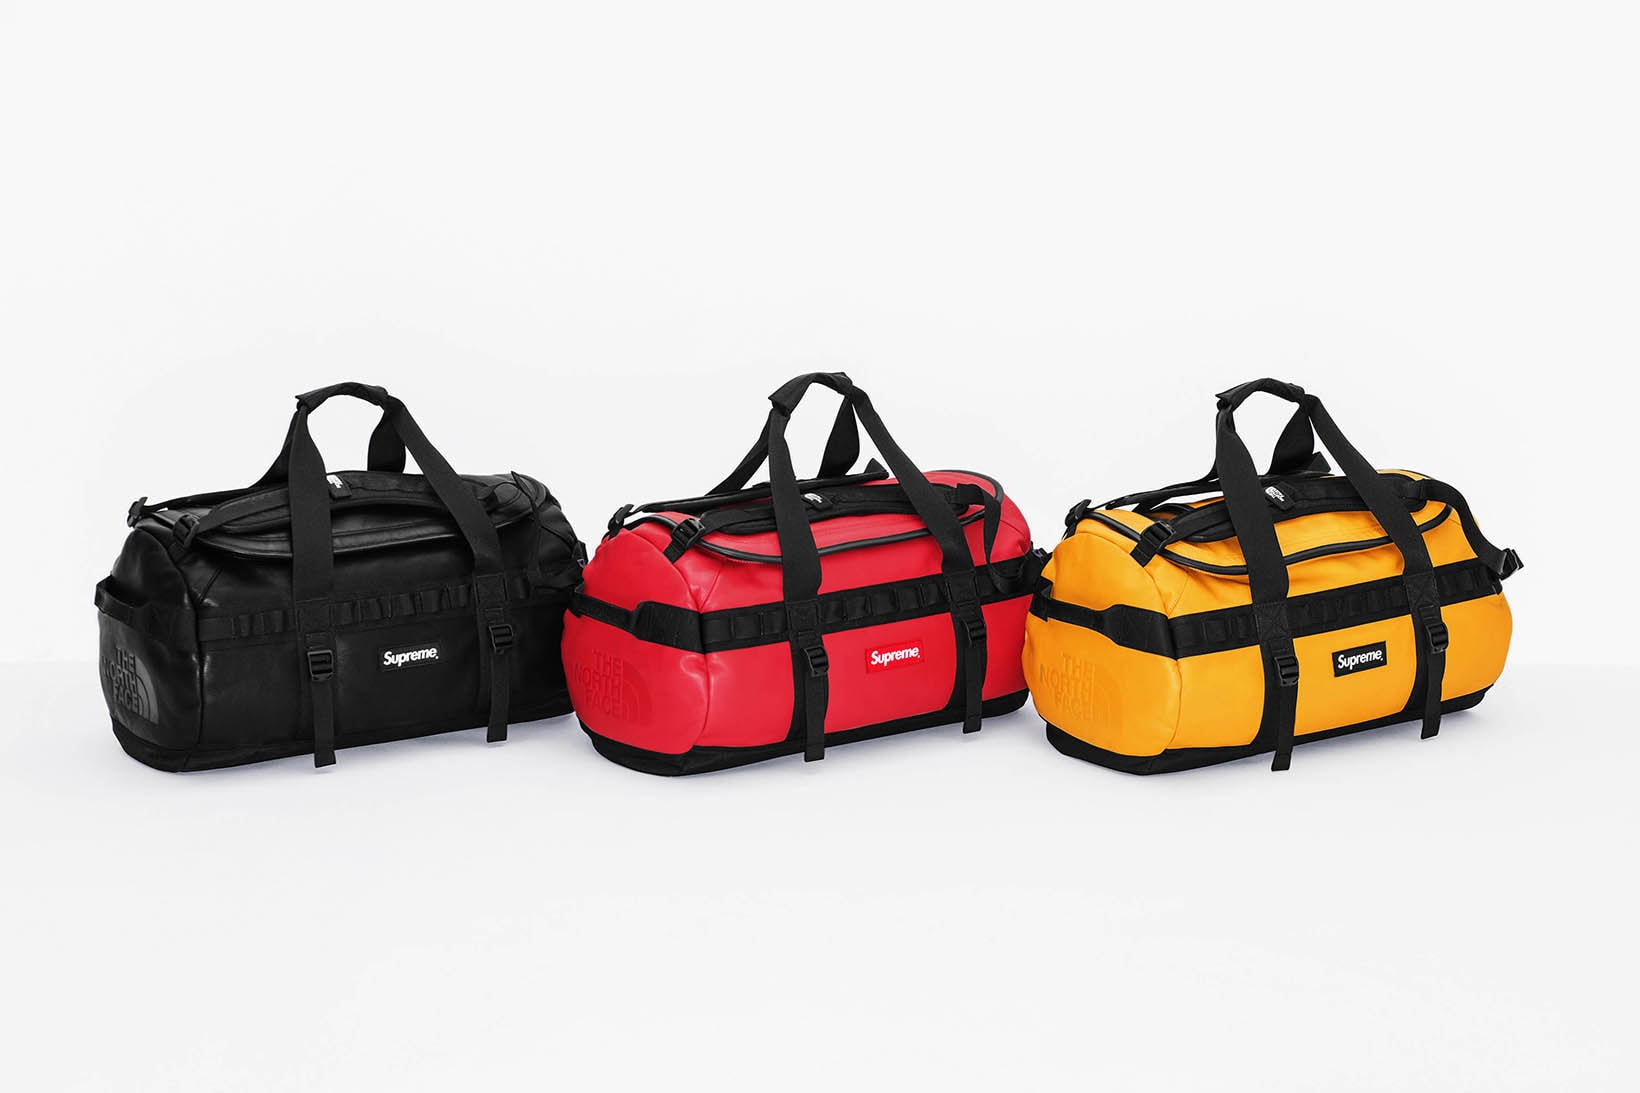 Supreme x The North Face 2017 Fall Group Duffel